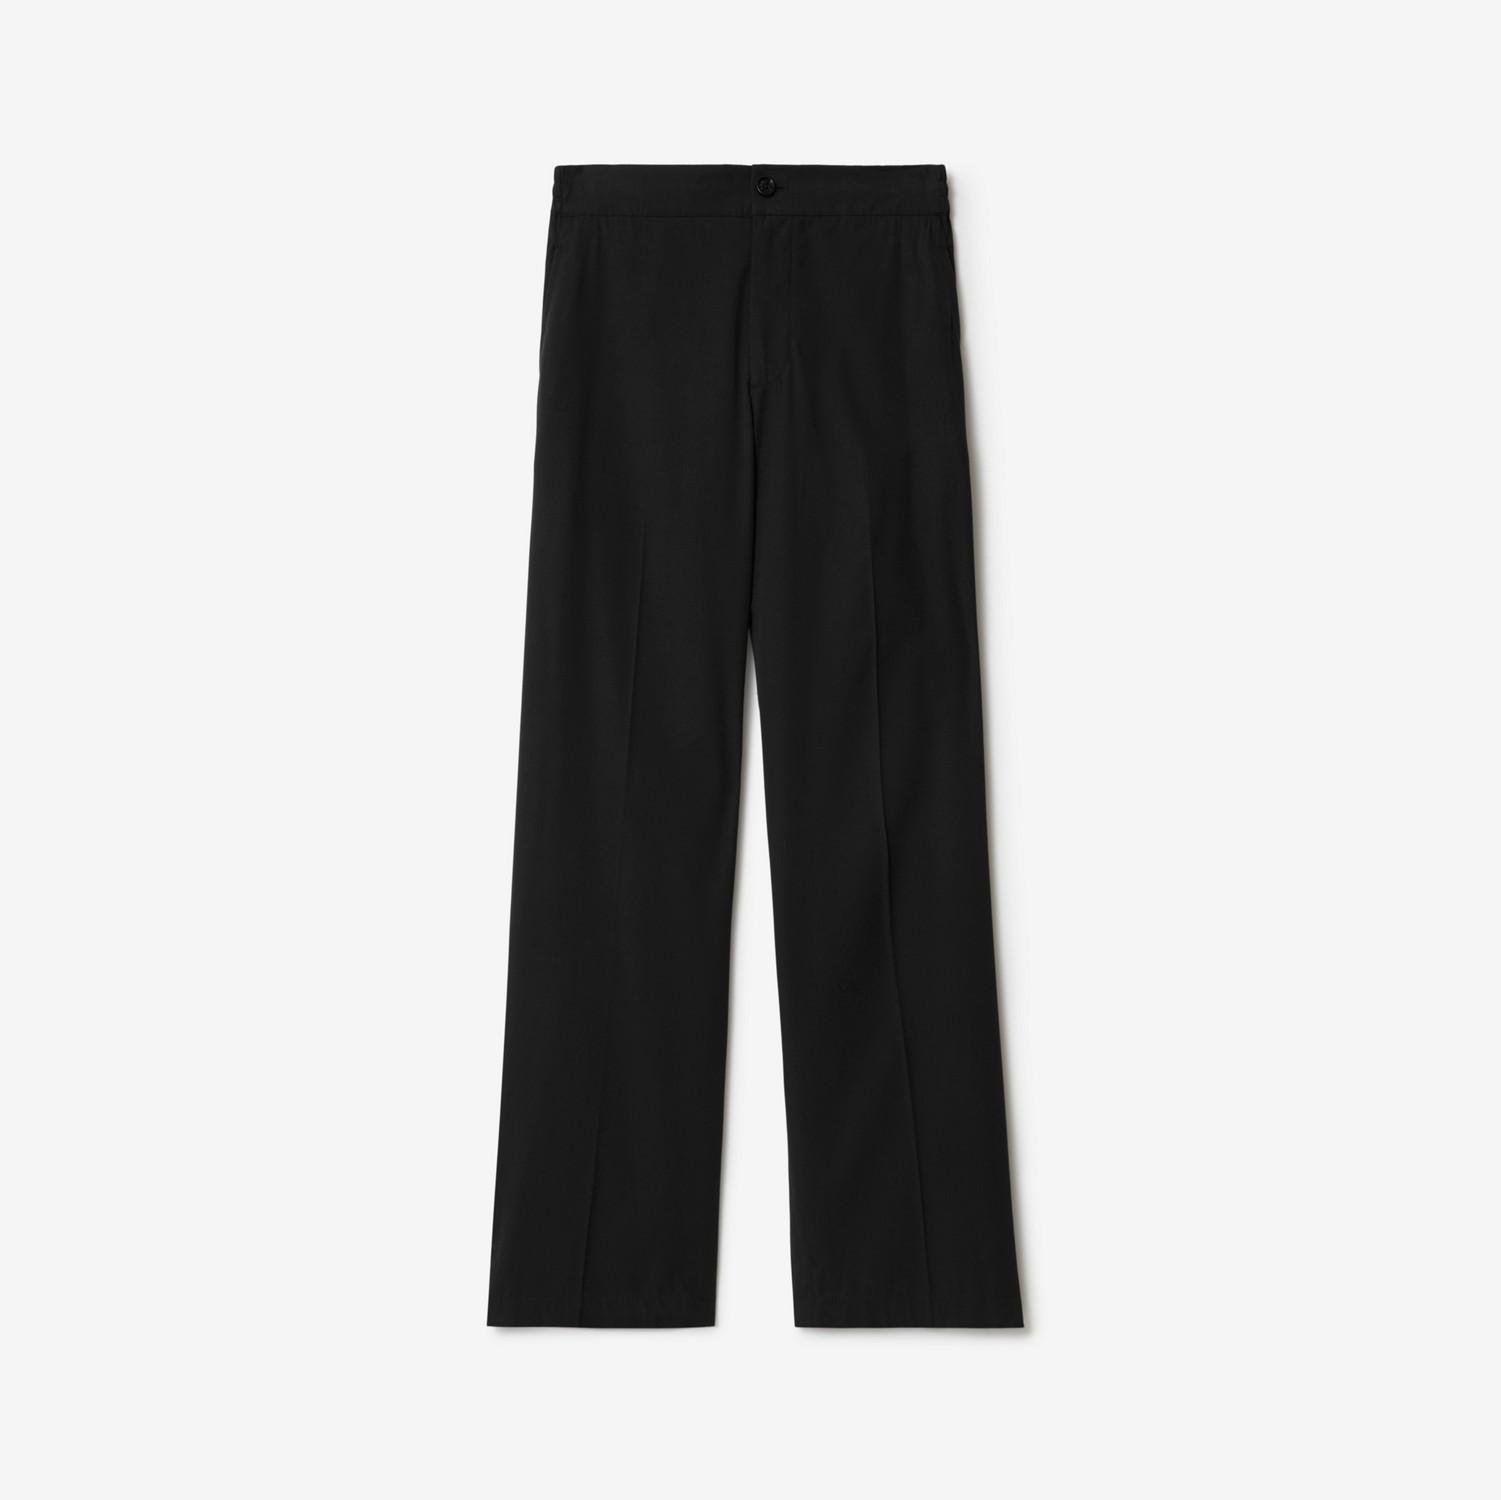 Cotton Blend Tailored Trousers by BURBERRY